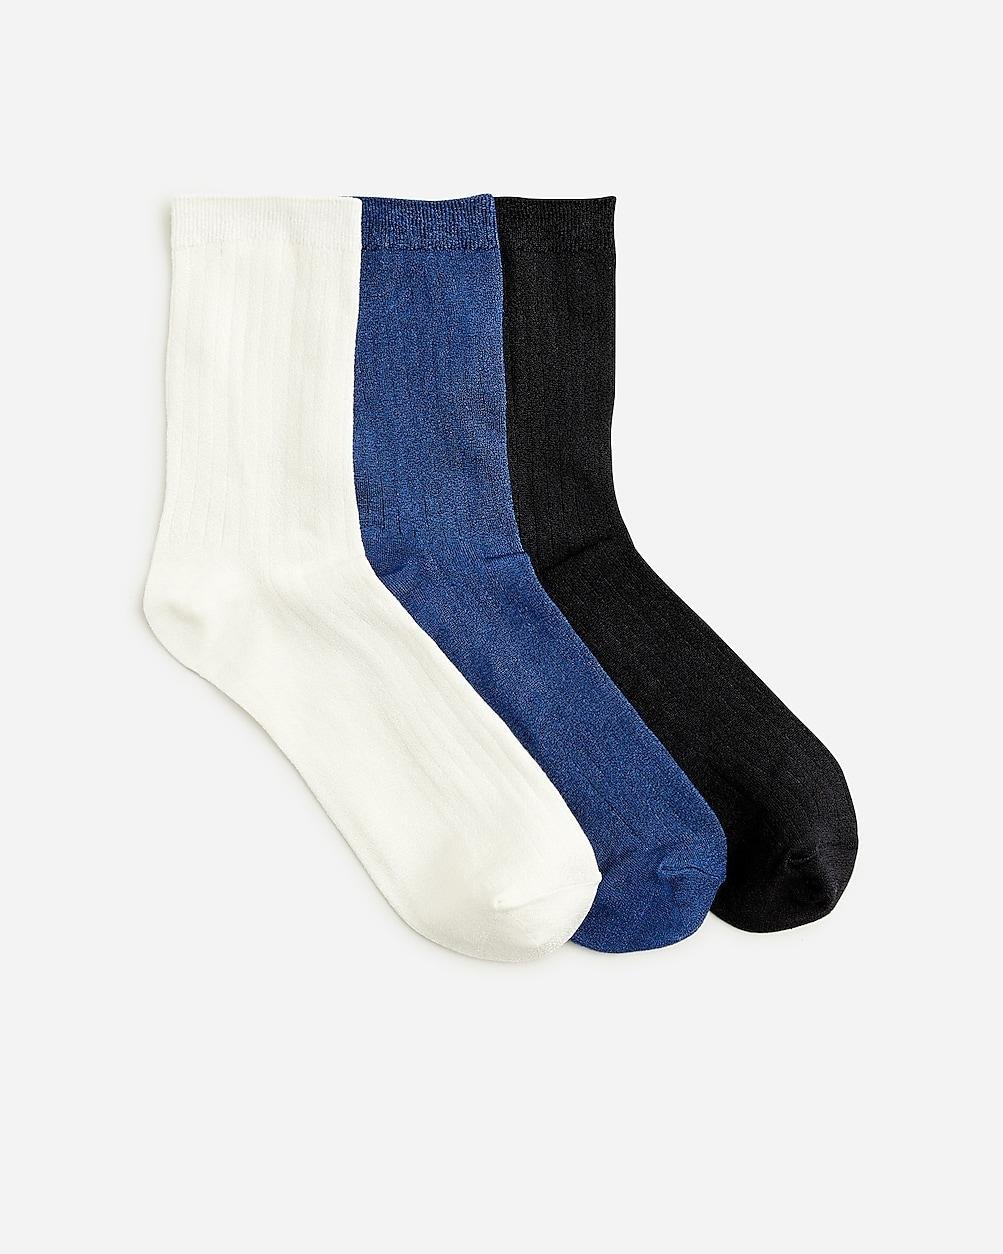 Ribbed bootie socks three-pack by J.CREW